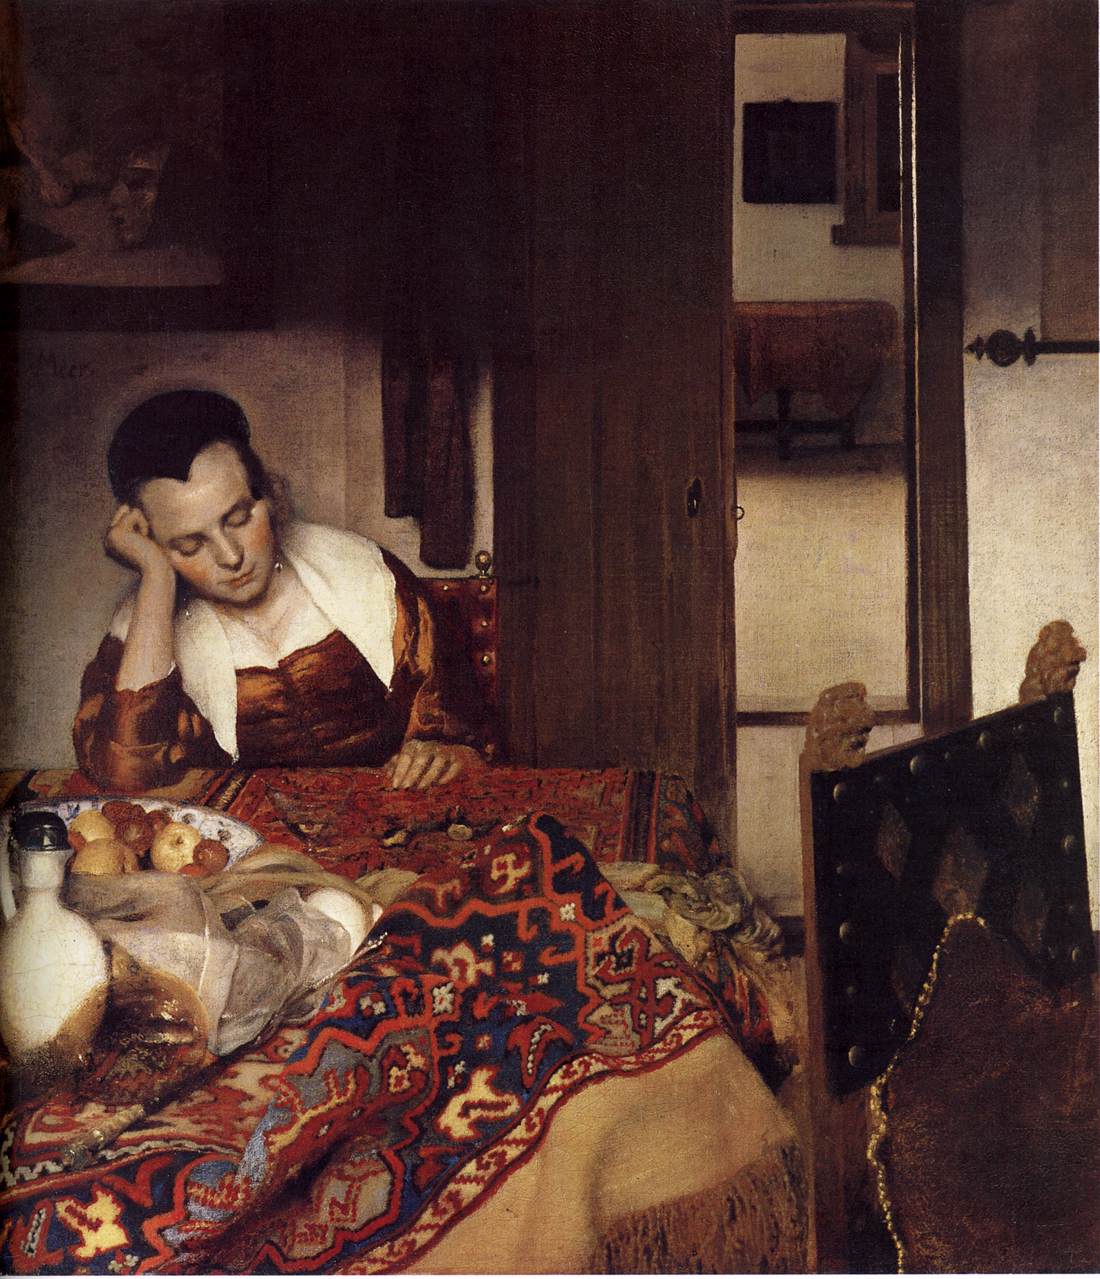 A Woman Sleeping on the Table